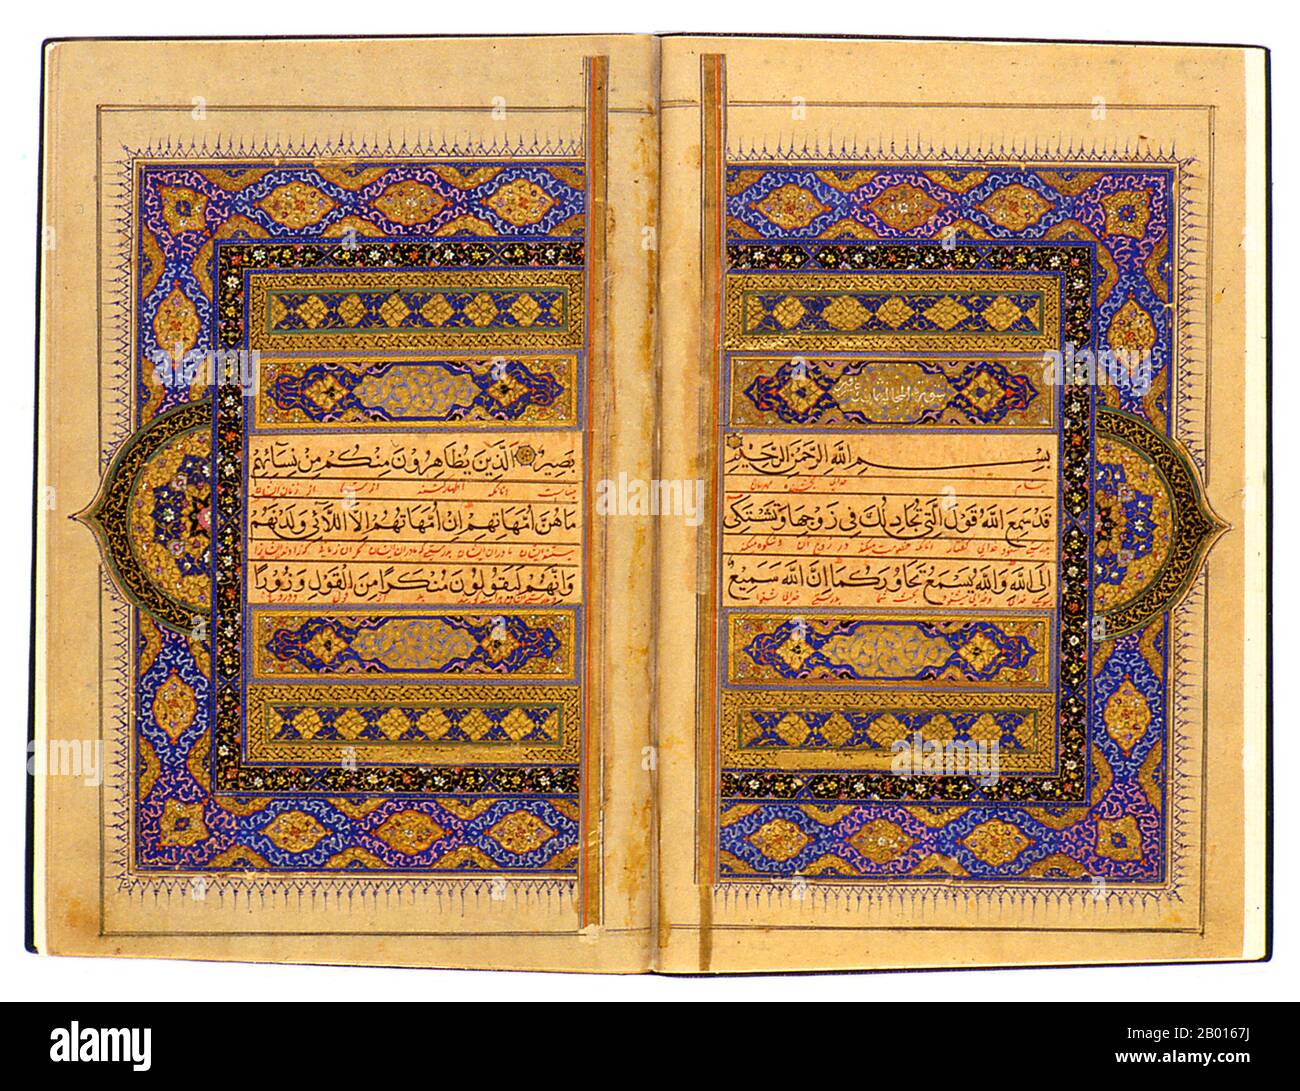 Afghanistan: Folios from an illuminated Qur'an dated 1519, perhaps from Herat.  The Koran’s oldest illuminations were made by the famed illuminator Yari Mudhahhib, who was active under the late Timurids and early Safavids. The text was written in Naskh by the calligrapher Qasim Ali al-Hirawi in 1519. A Persian translation of the Koran’s Arabic text was added in red Nastaliq. The manuscript was once in the Qutb Shahis’ library in Golconda, but fell into the hands of the Great Mughals when Aurangzeb conquered Golconda in 1687. Stock Photo